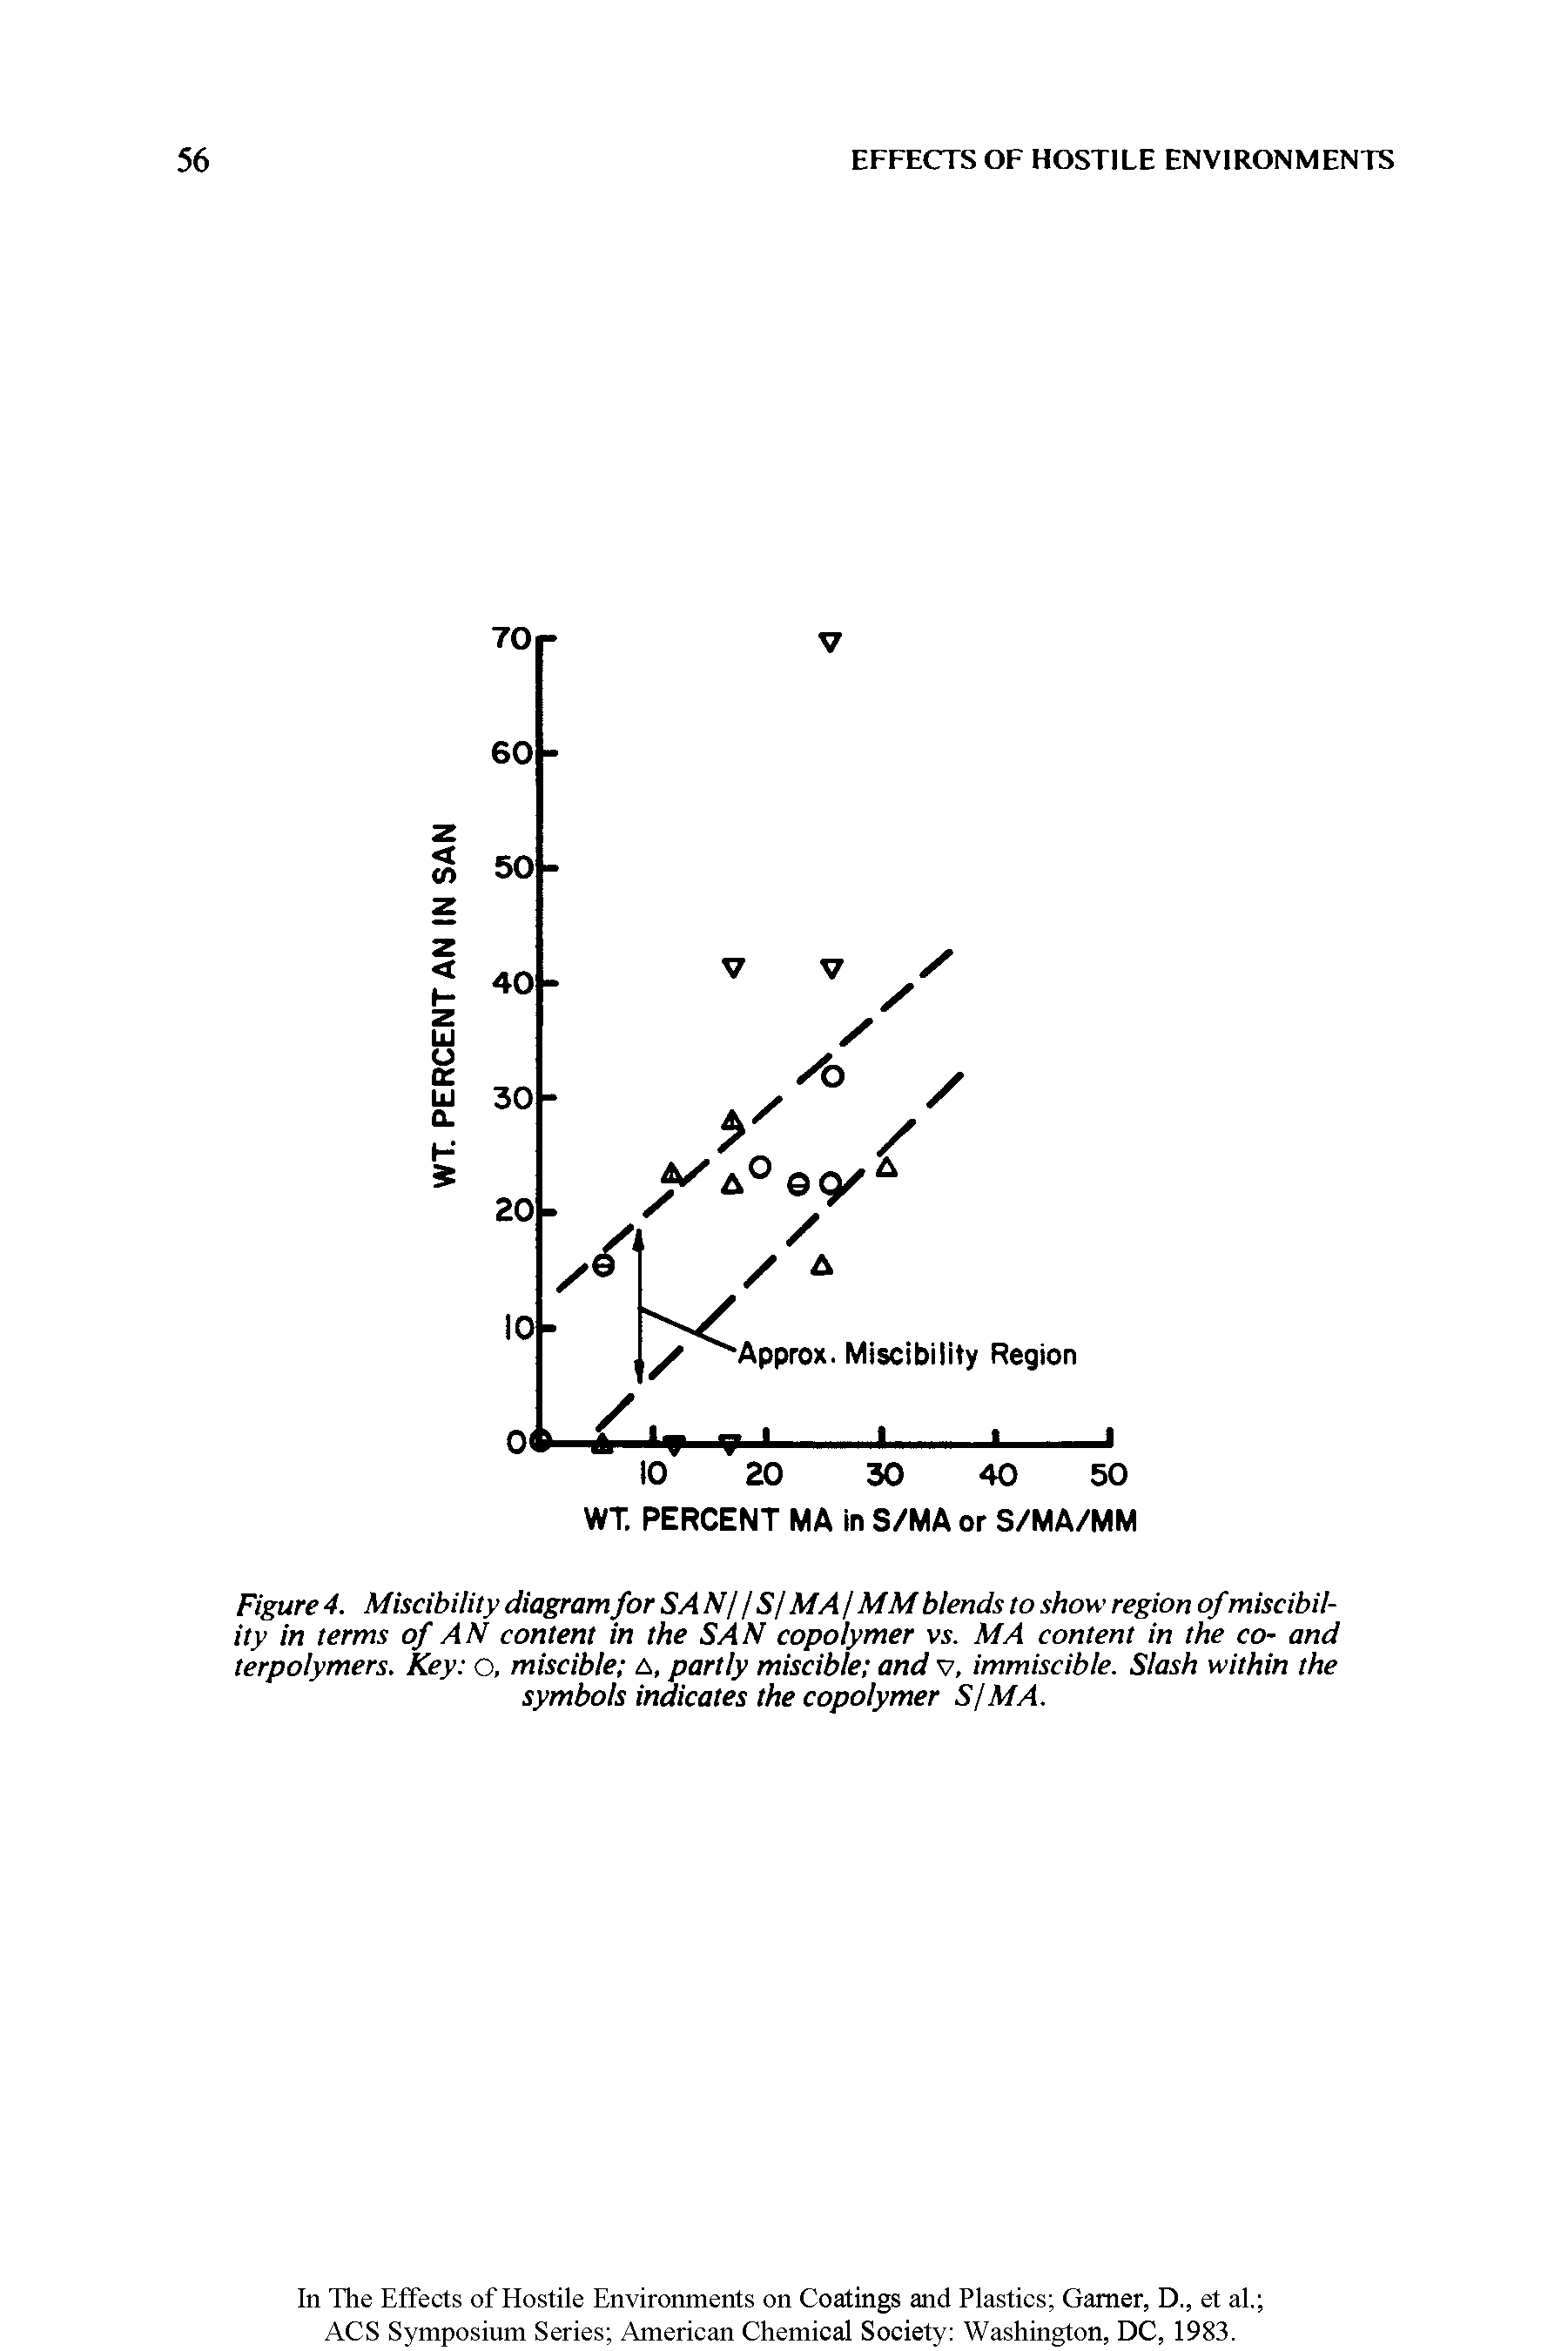 Figure 4. Miscibility diagram for SA N//S/ MA / MM blends to show region ofmiscibility in terms of AN content in the SAN copolymer vs. MA content in the co- and terpolymers. Key o, miscible is, partly miscible and v, immiscible. Slash within the symbols indicates the copolymer S/MA.